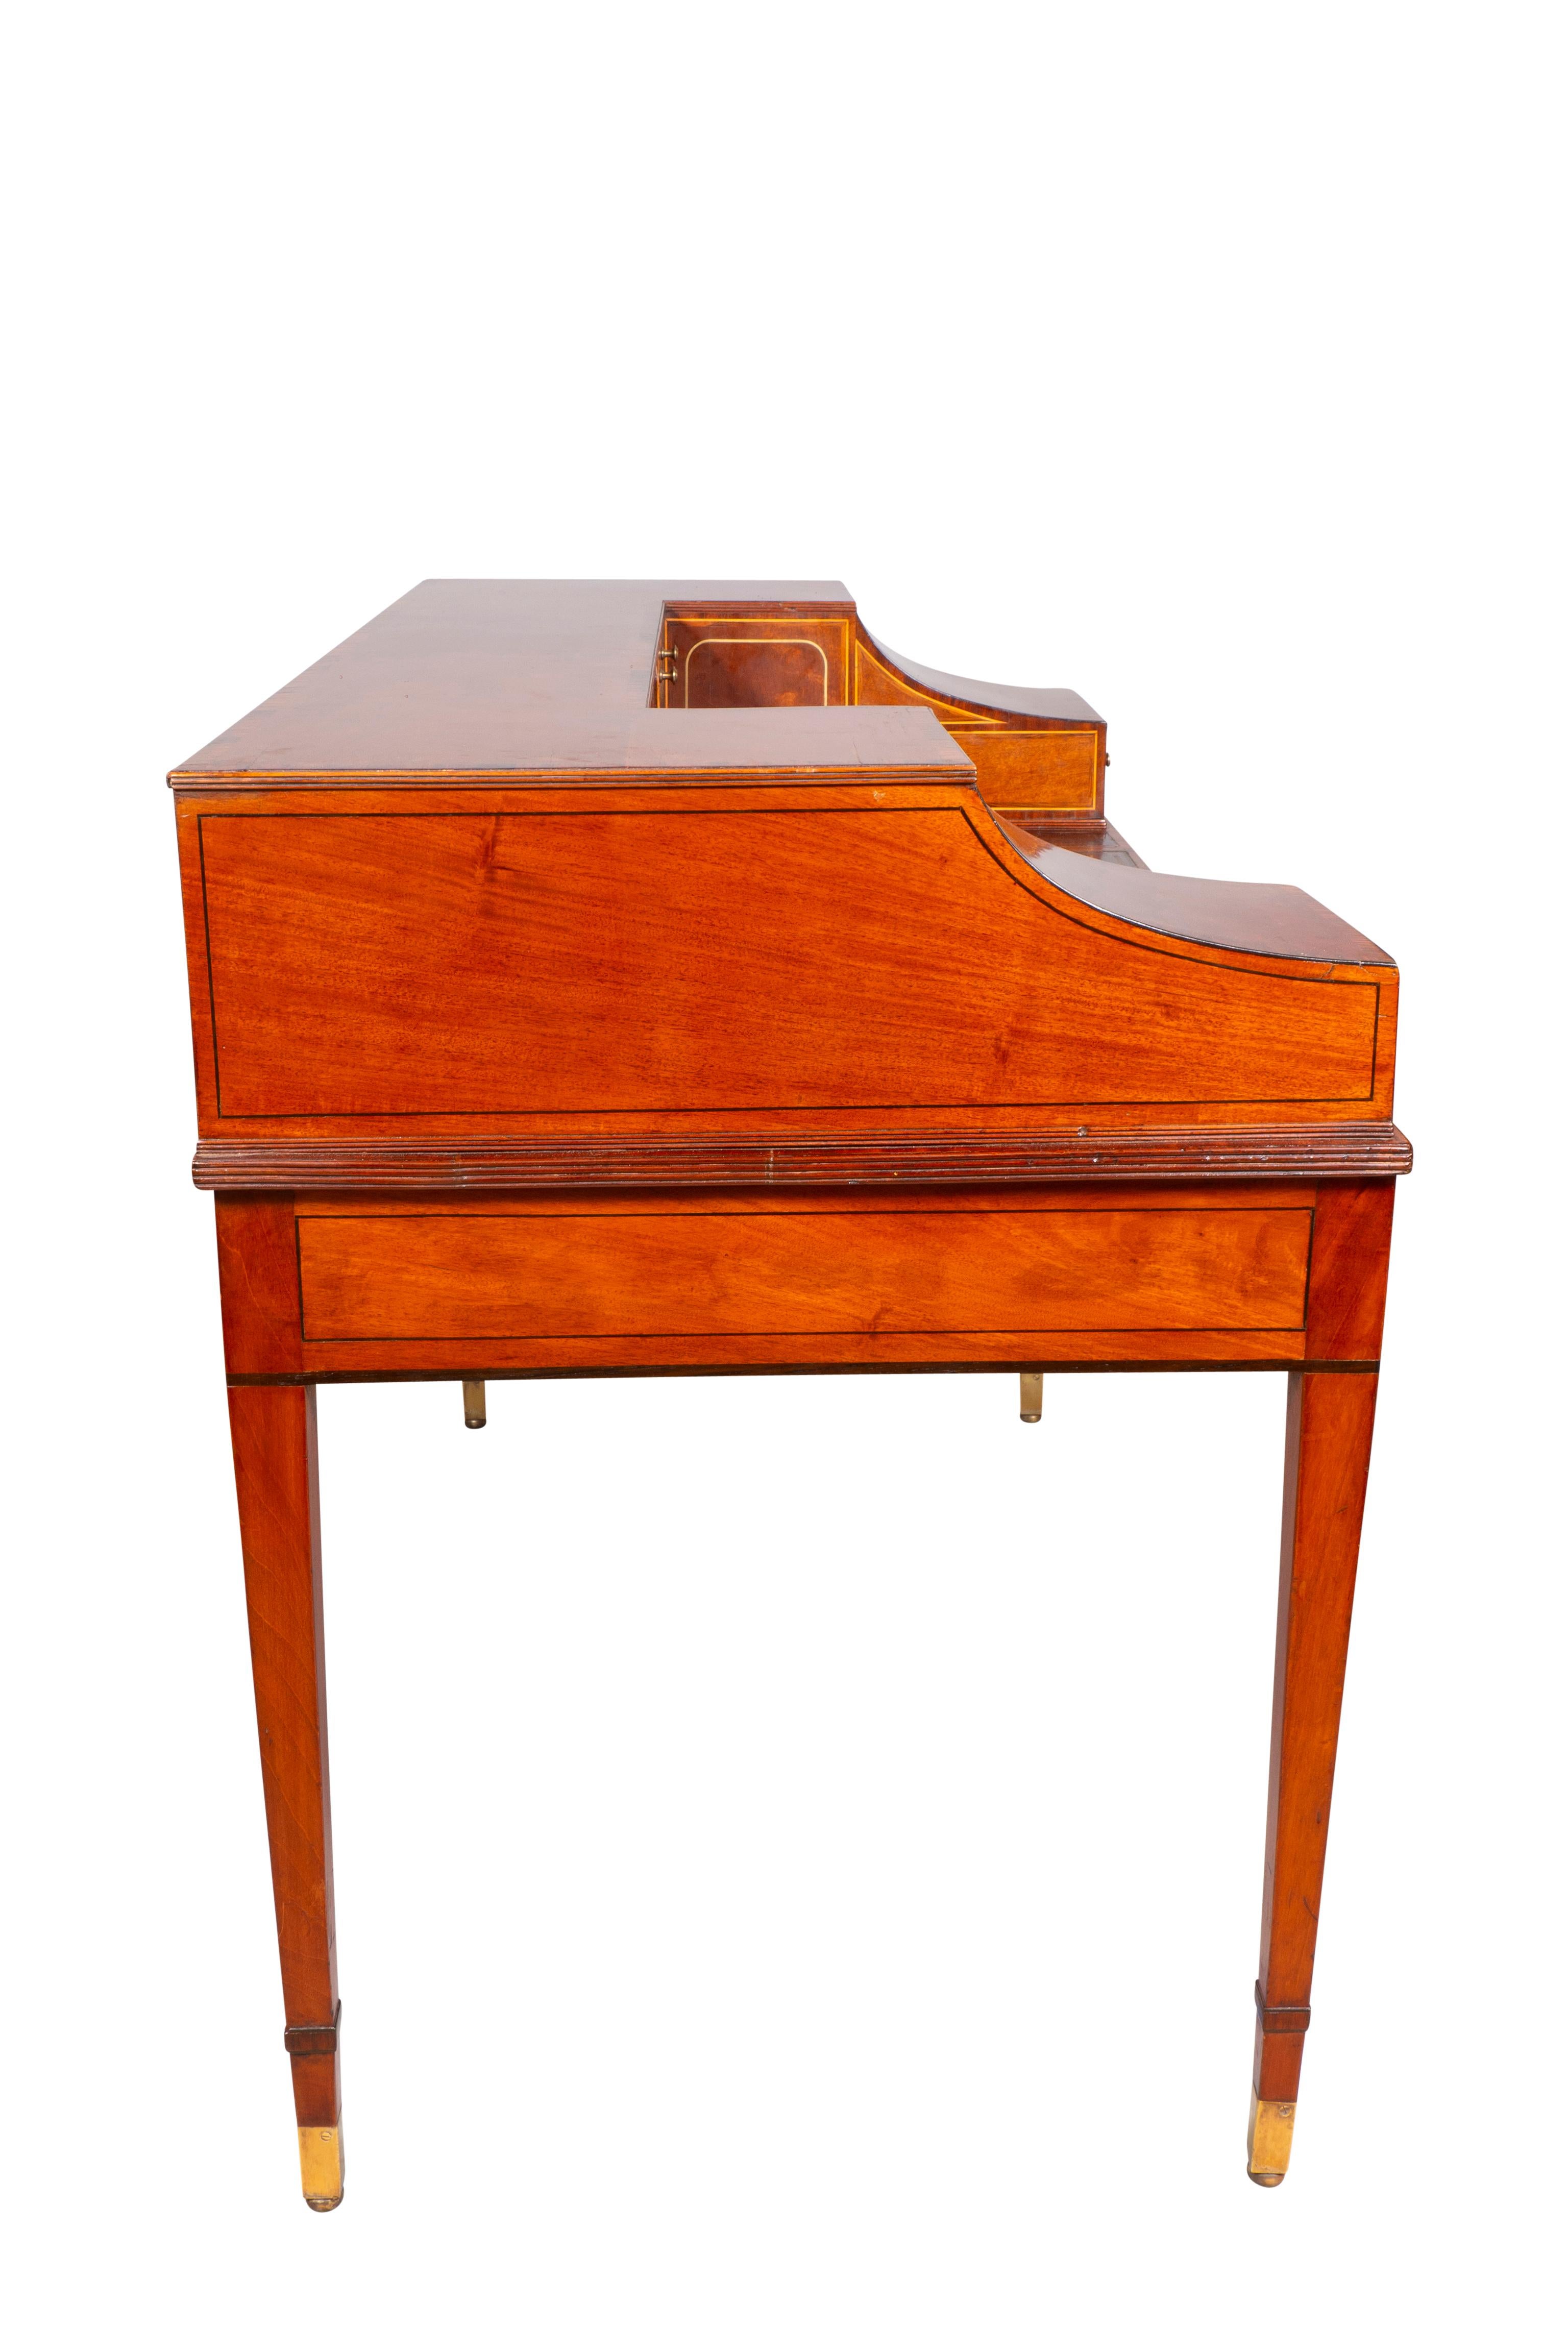 George III Style Mahogany And Brass Inlaid Carleton House Desk For Sale 2